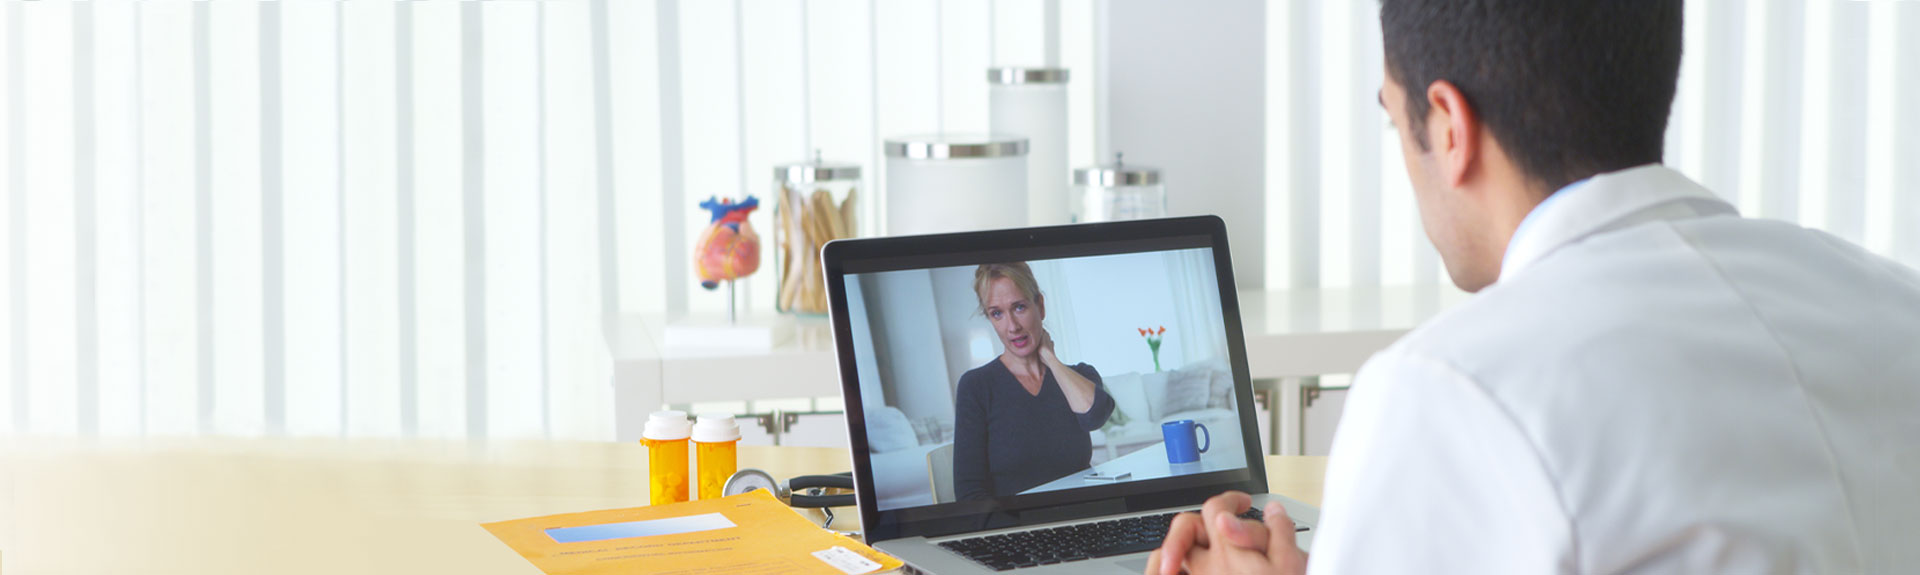 image of individual on a virtual video conference 